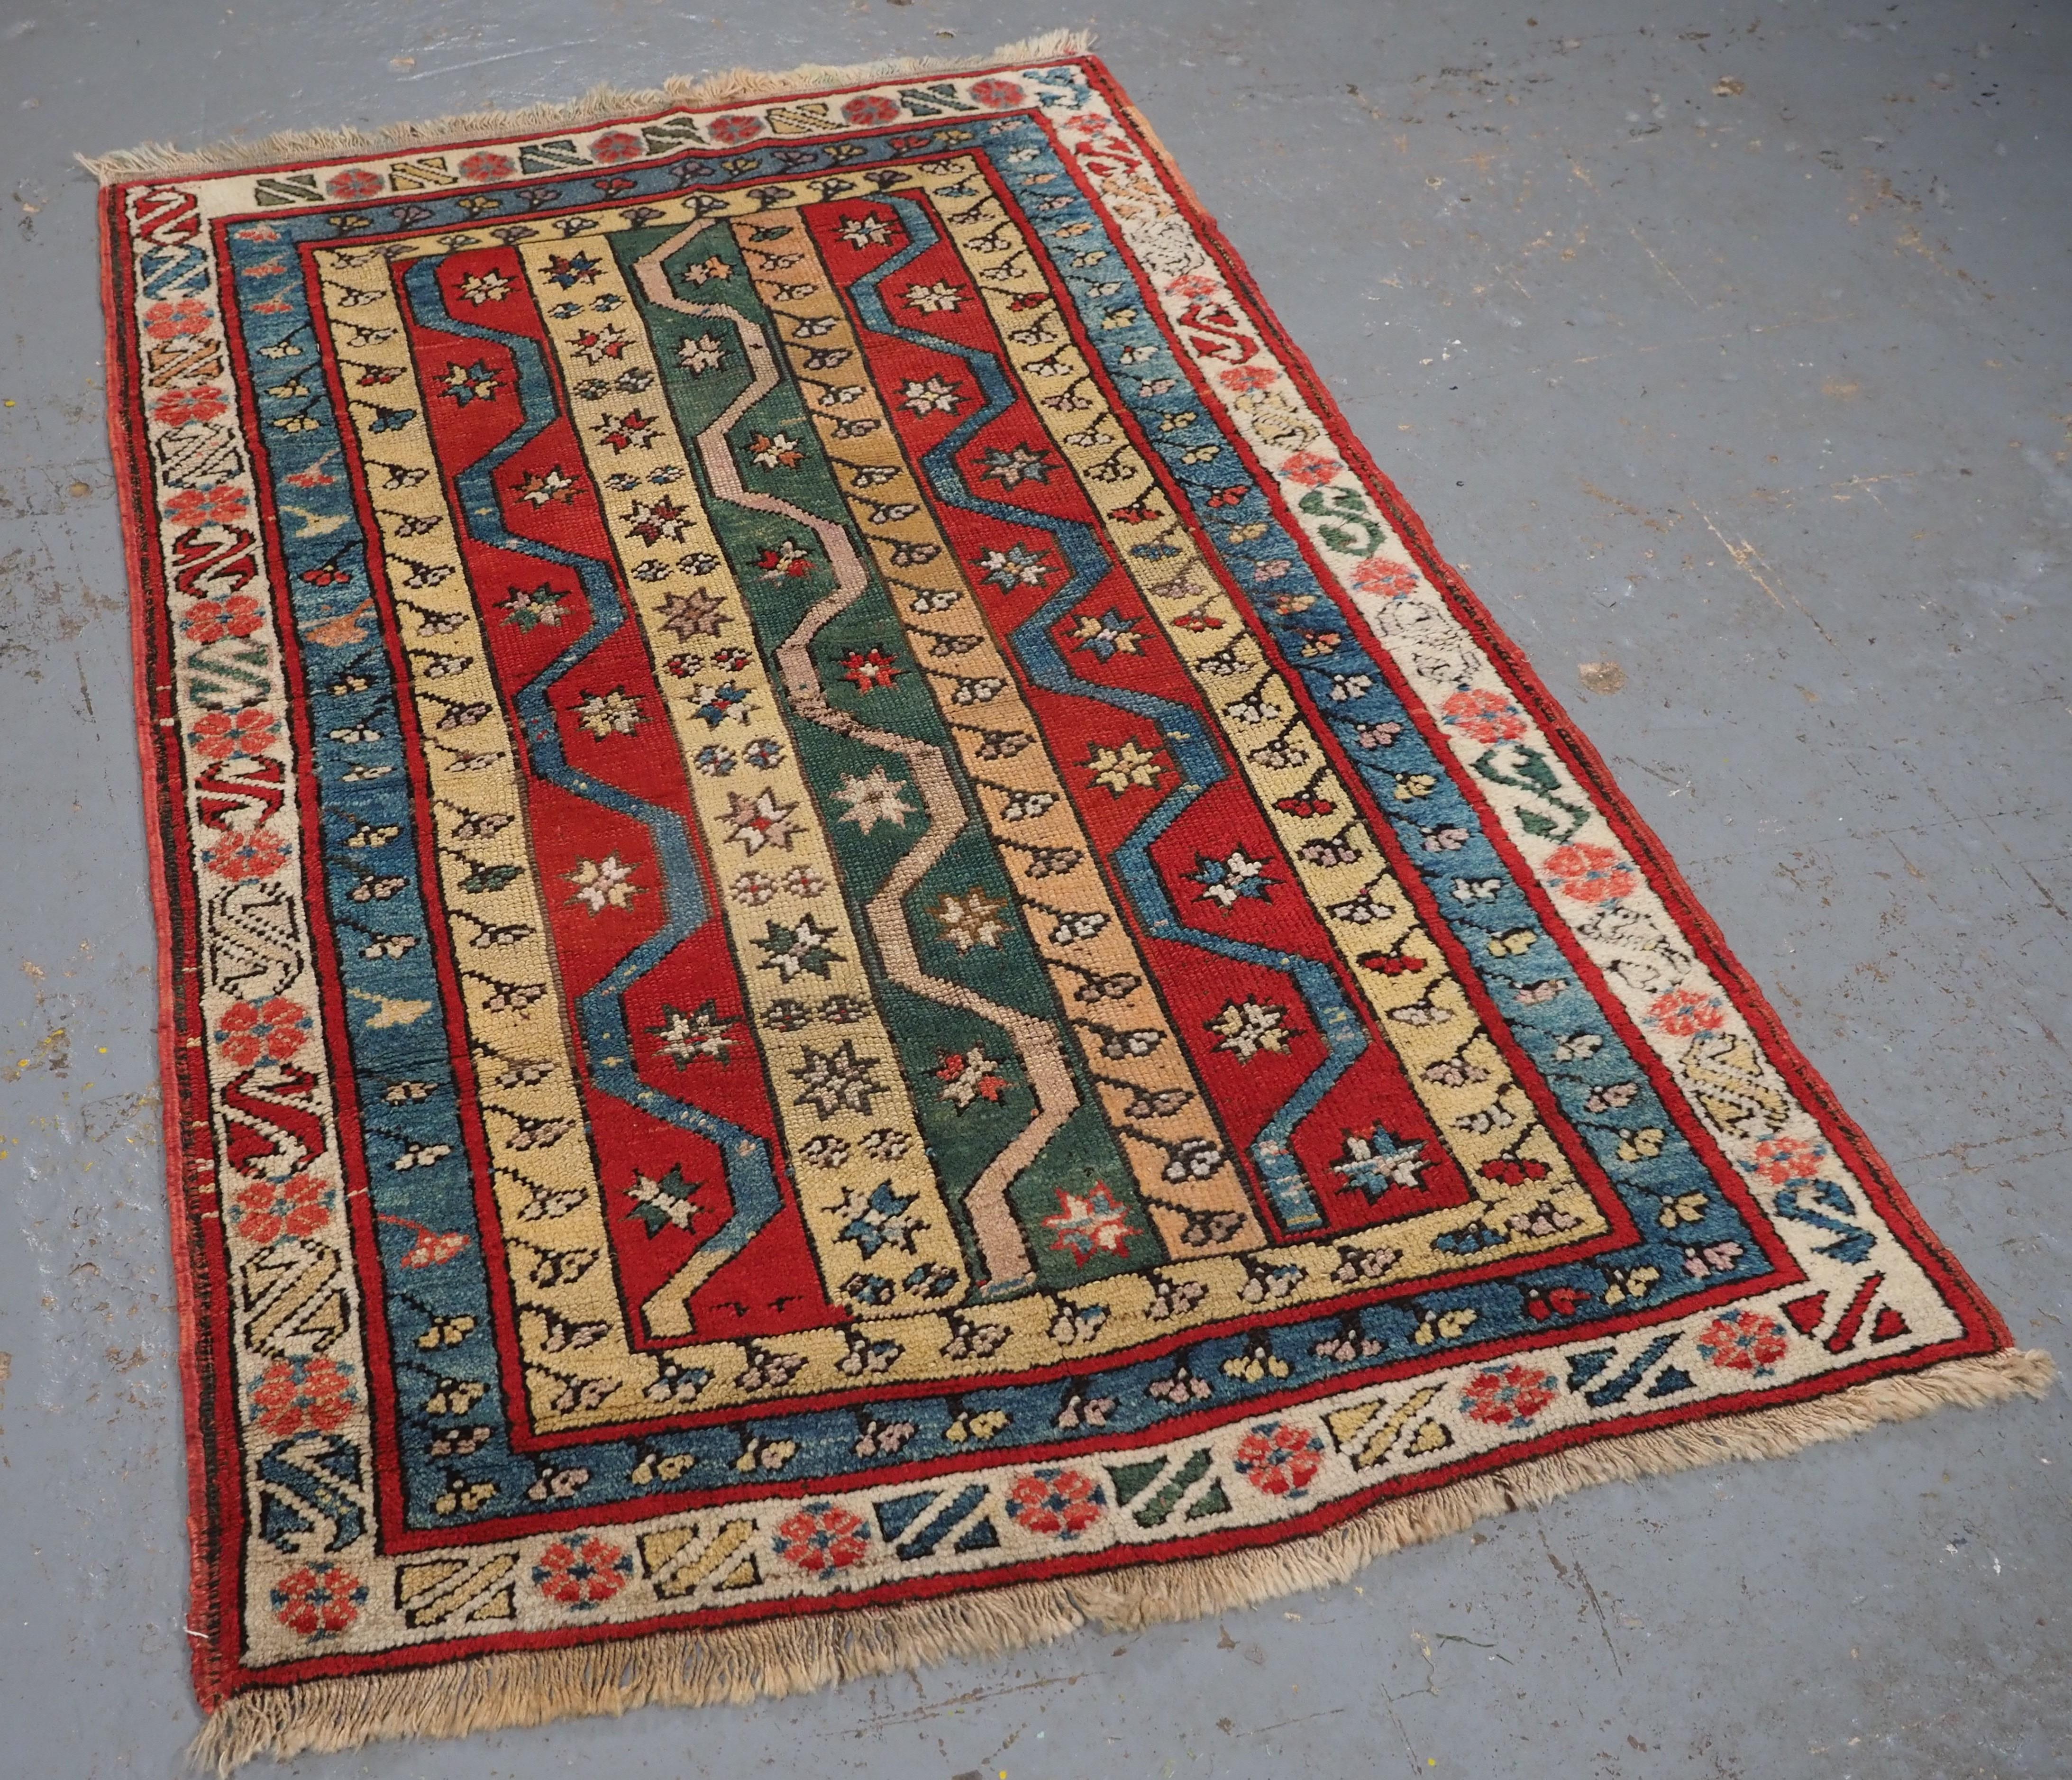 Size: 5ft 7in x 3ft 7in (170 x 108cm).

Antique Central Anatolian Konya region village rug.

Circa 1900/20.

A nice small example of a Konya village rug with a classic design, the rug has a colourful stripe design with stars and carnation flowers.